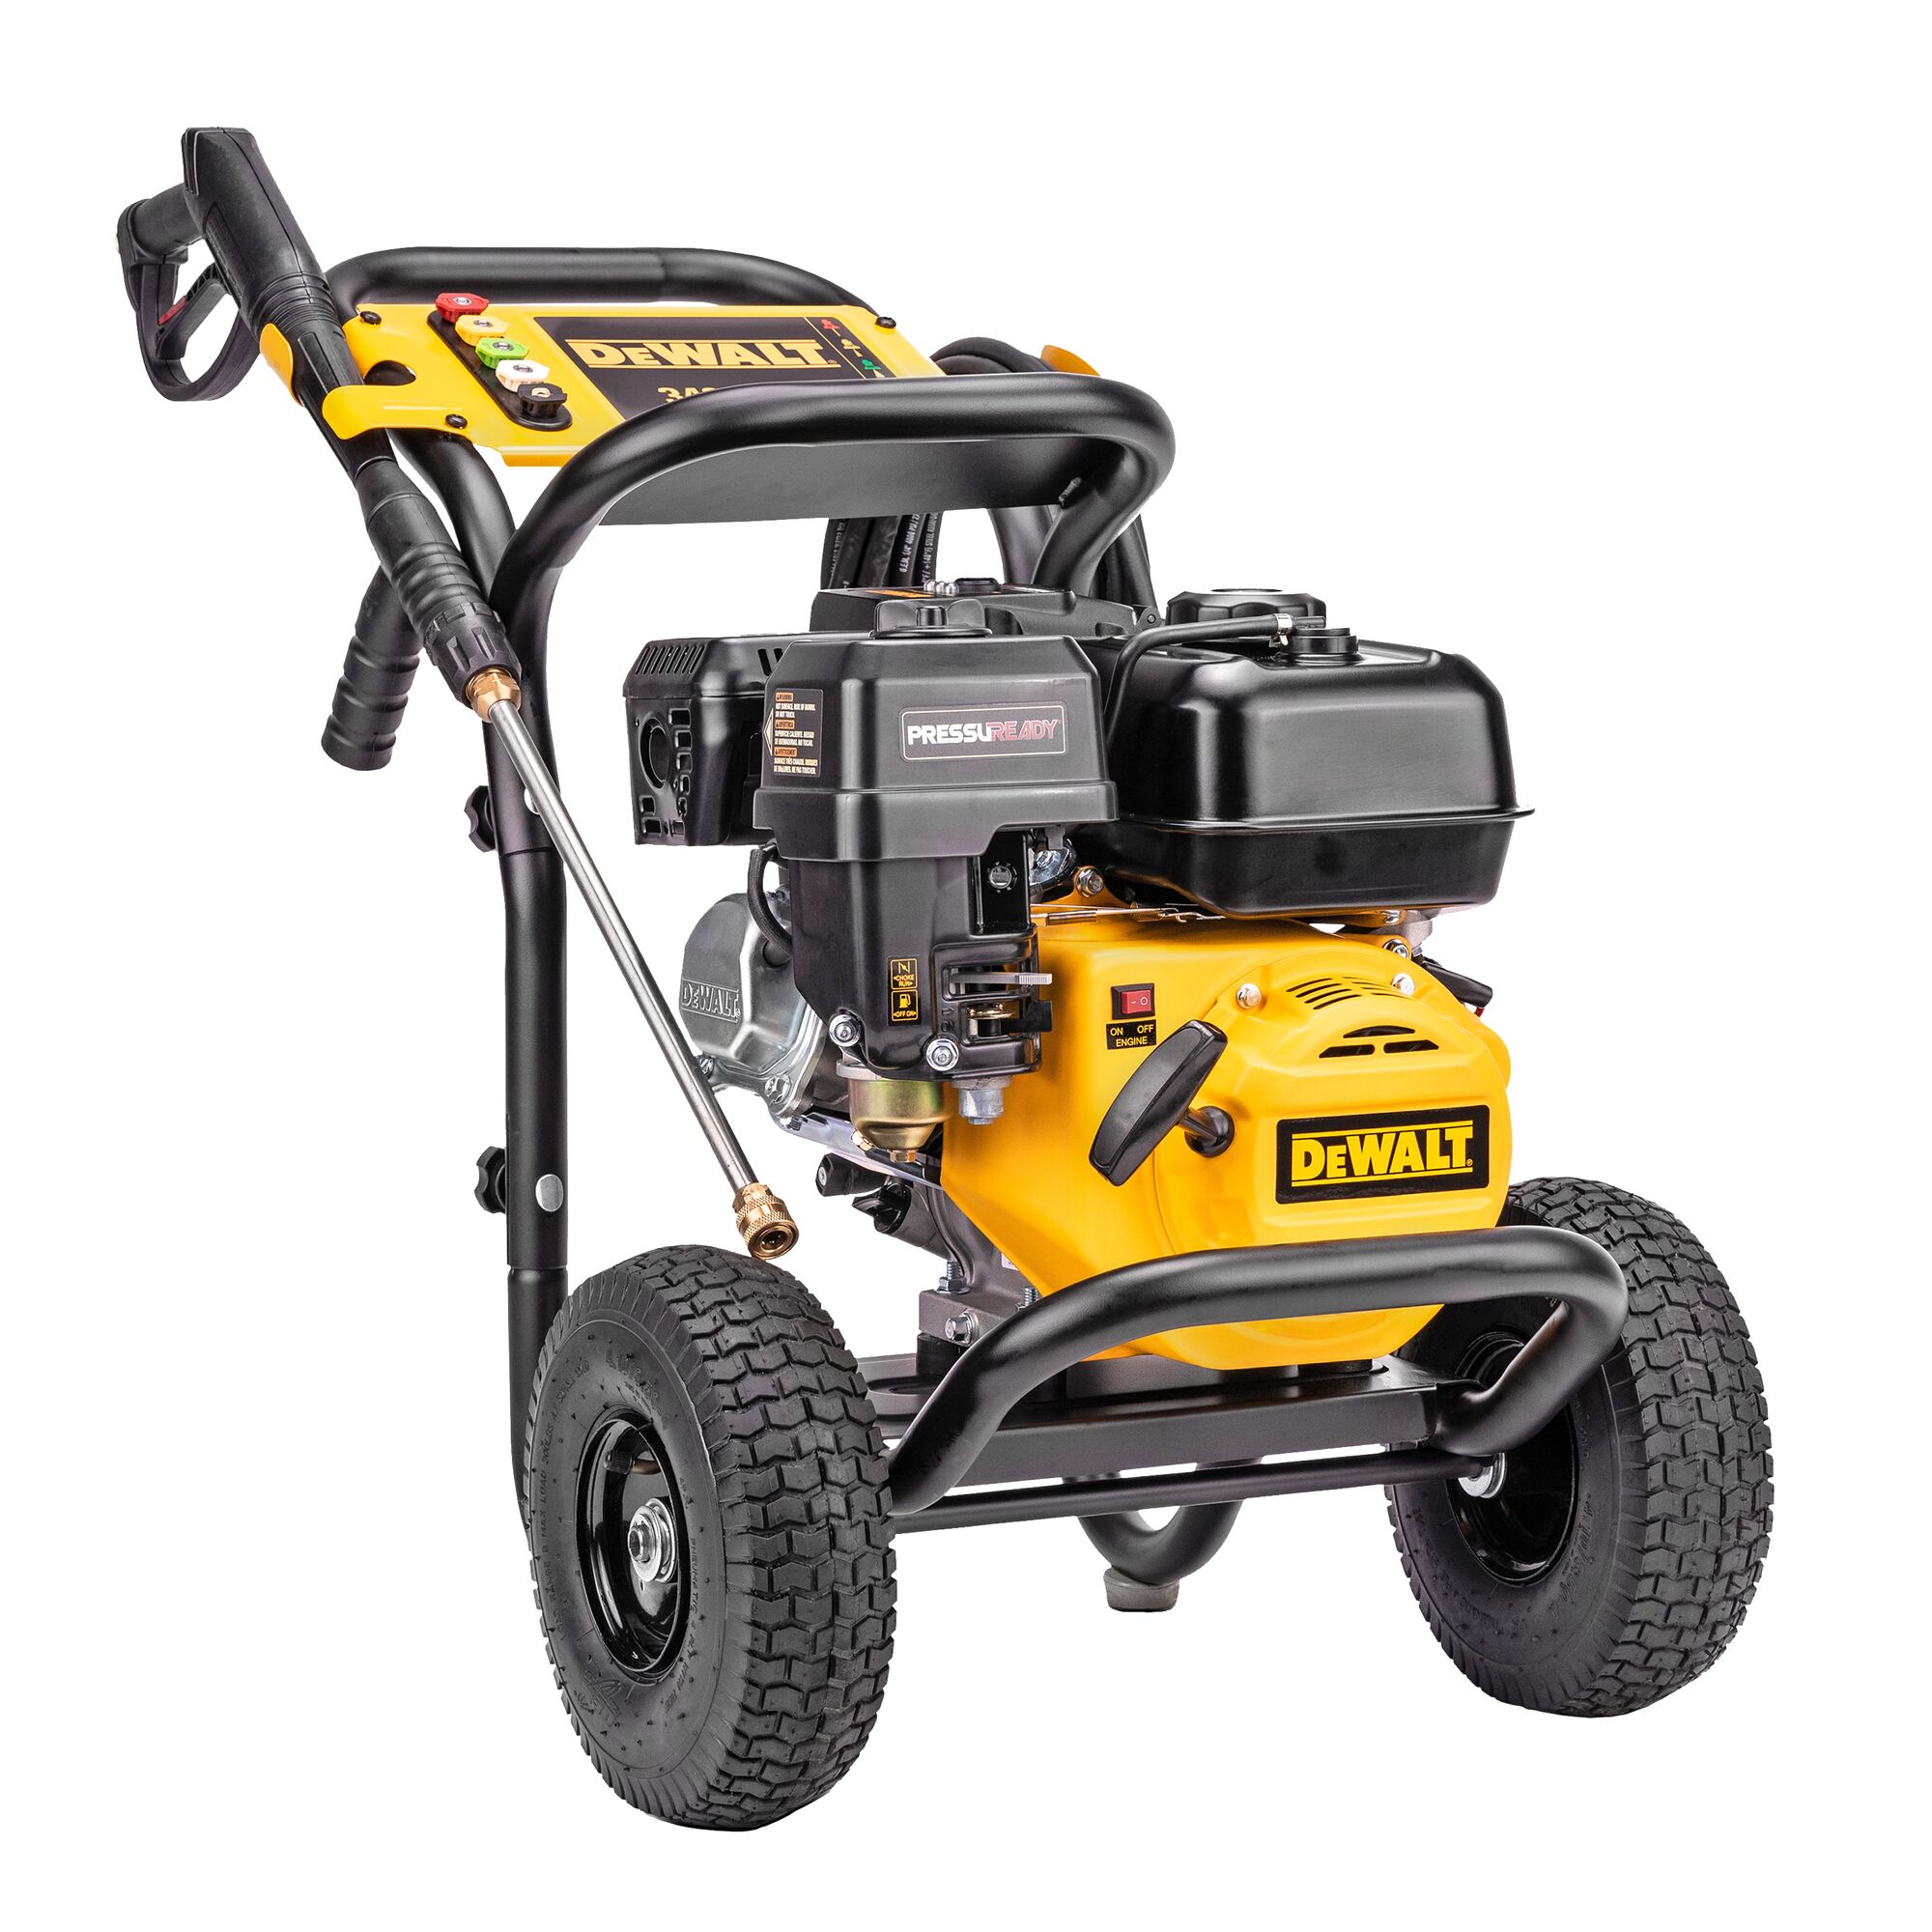 PressuReady® 3400 PSI at 2.5 GPM Powered Cold Water Gas Pressure Washer